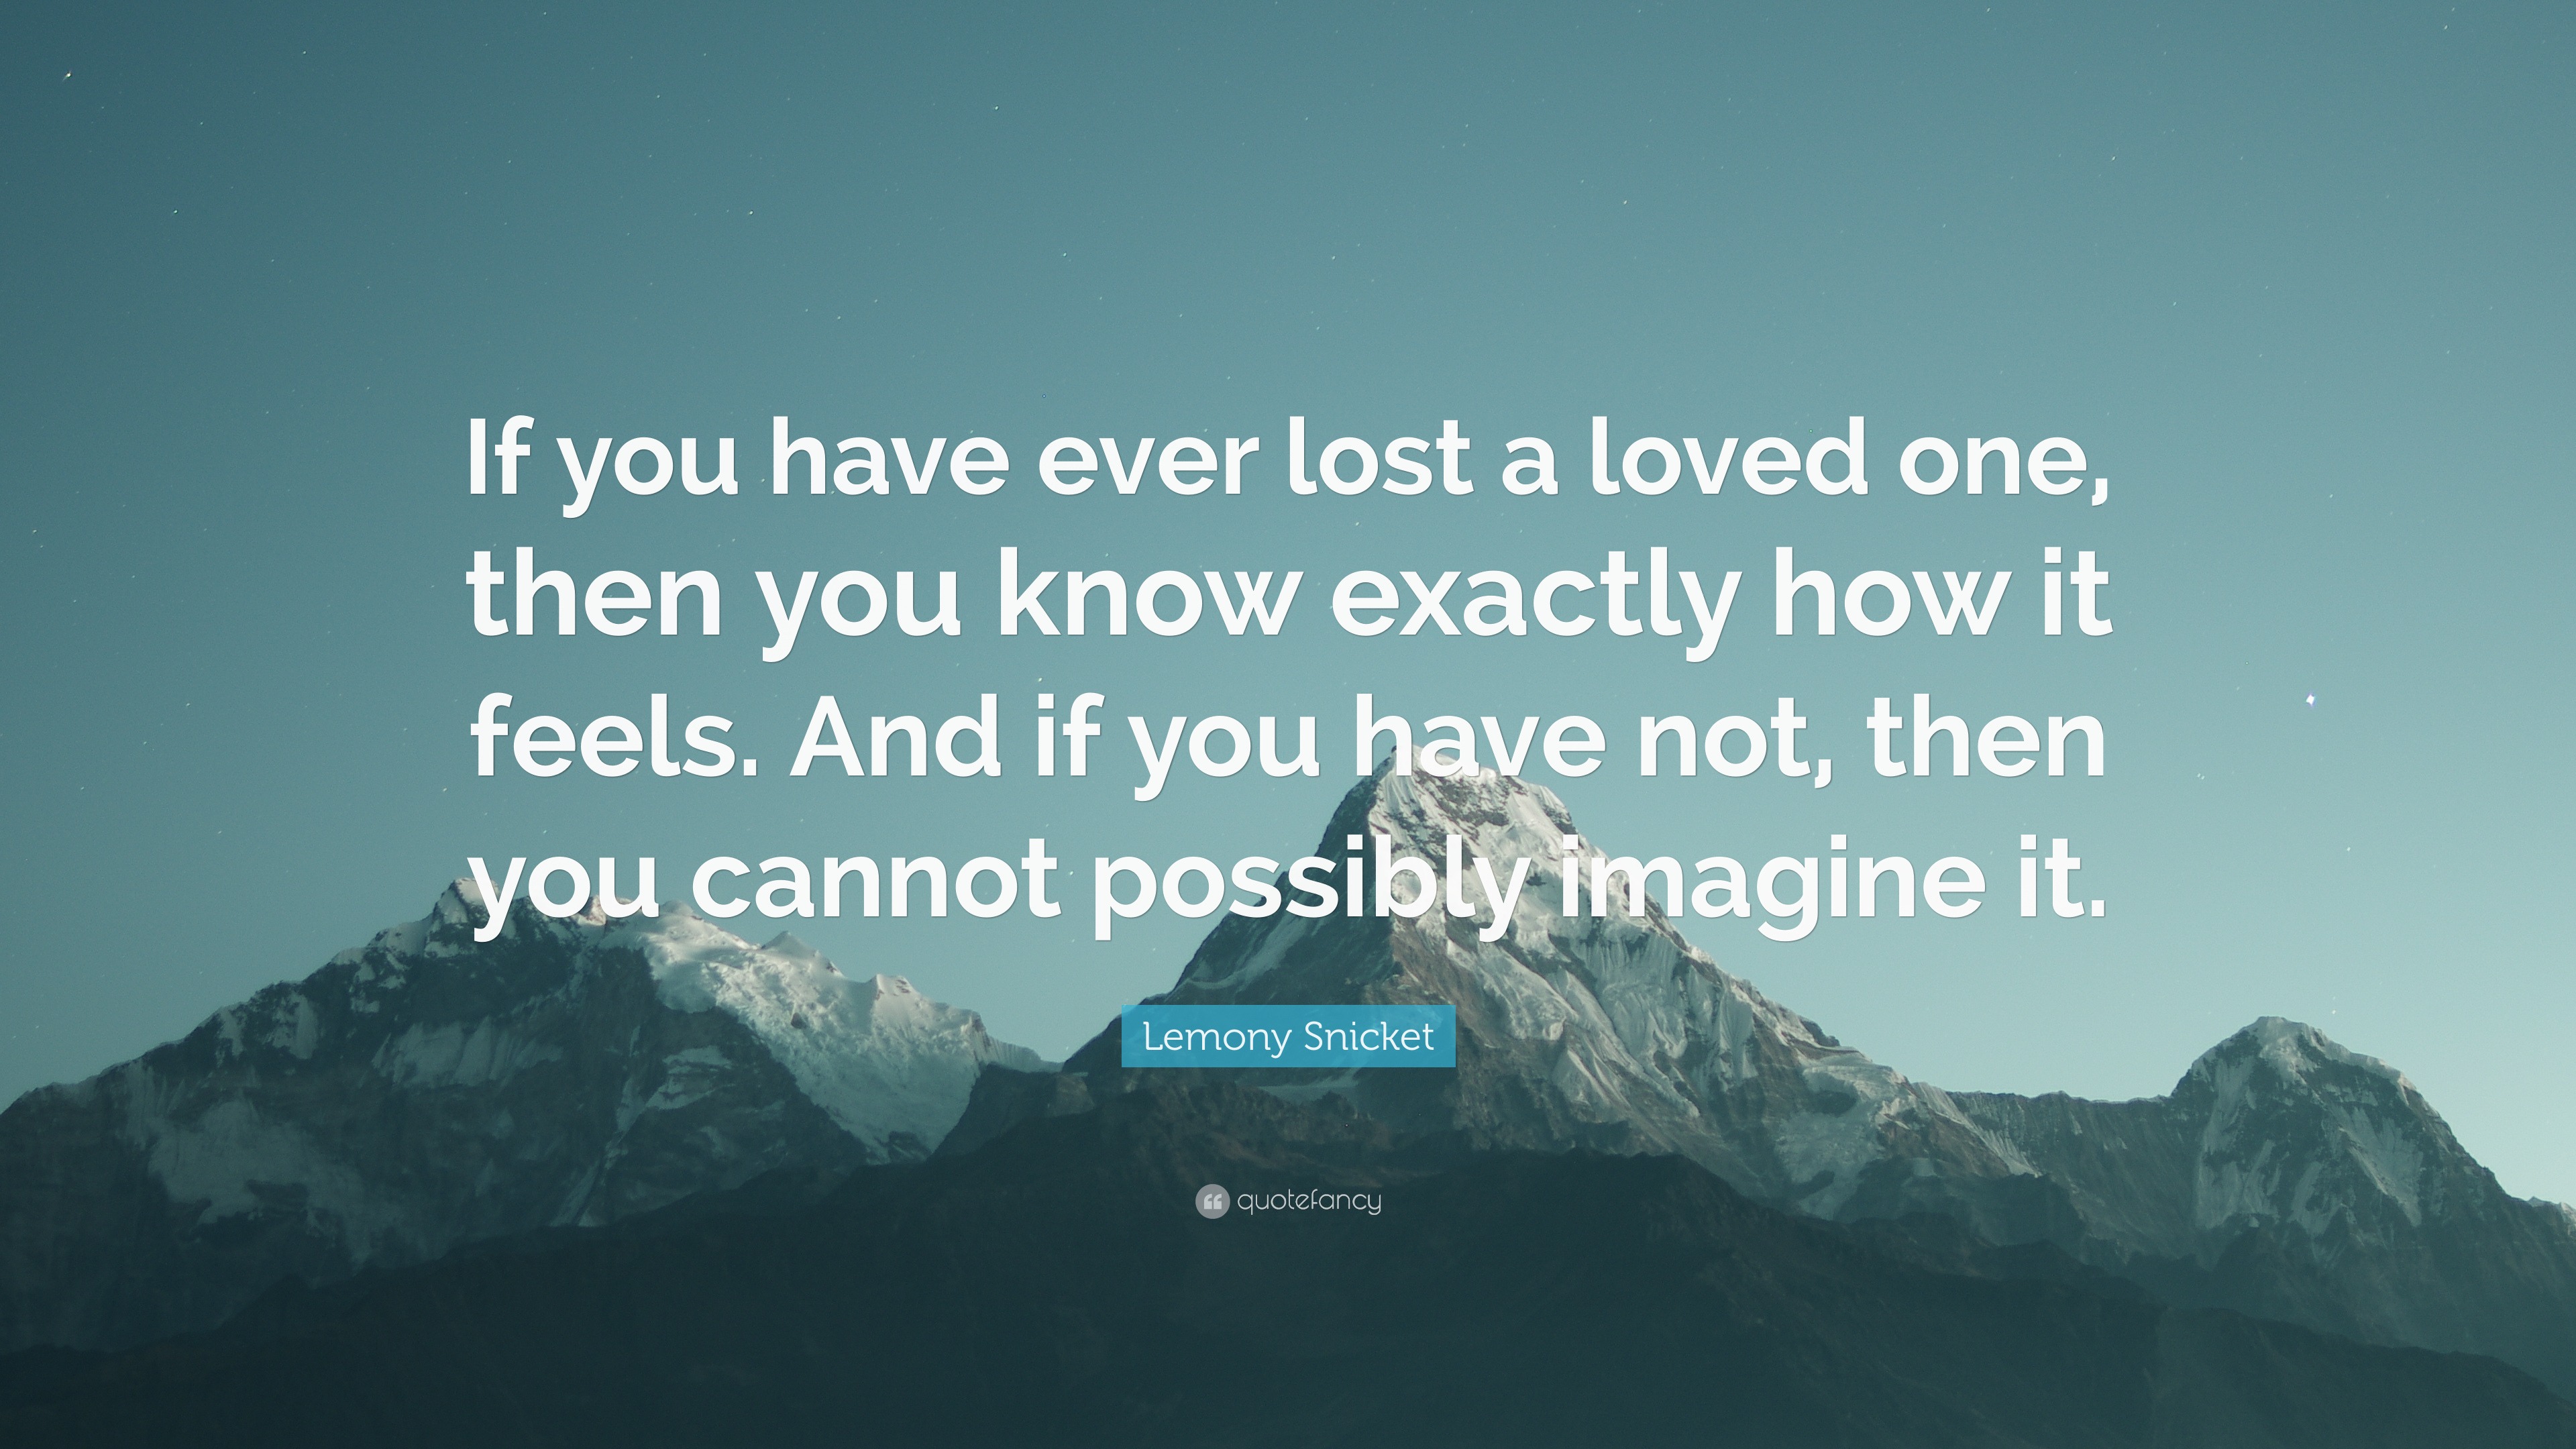 Lemony Snicket Quote: “If you have ever lost a loved one, then you know ...